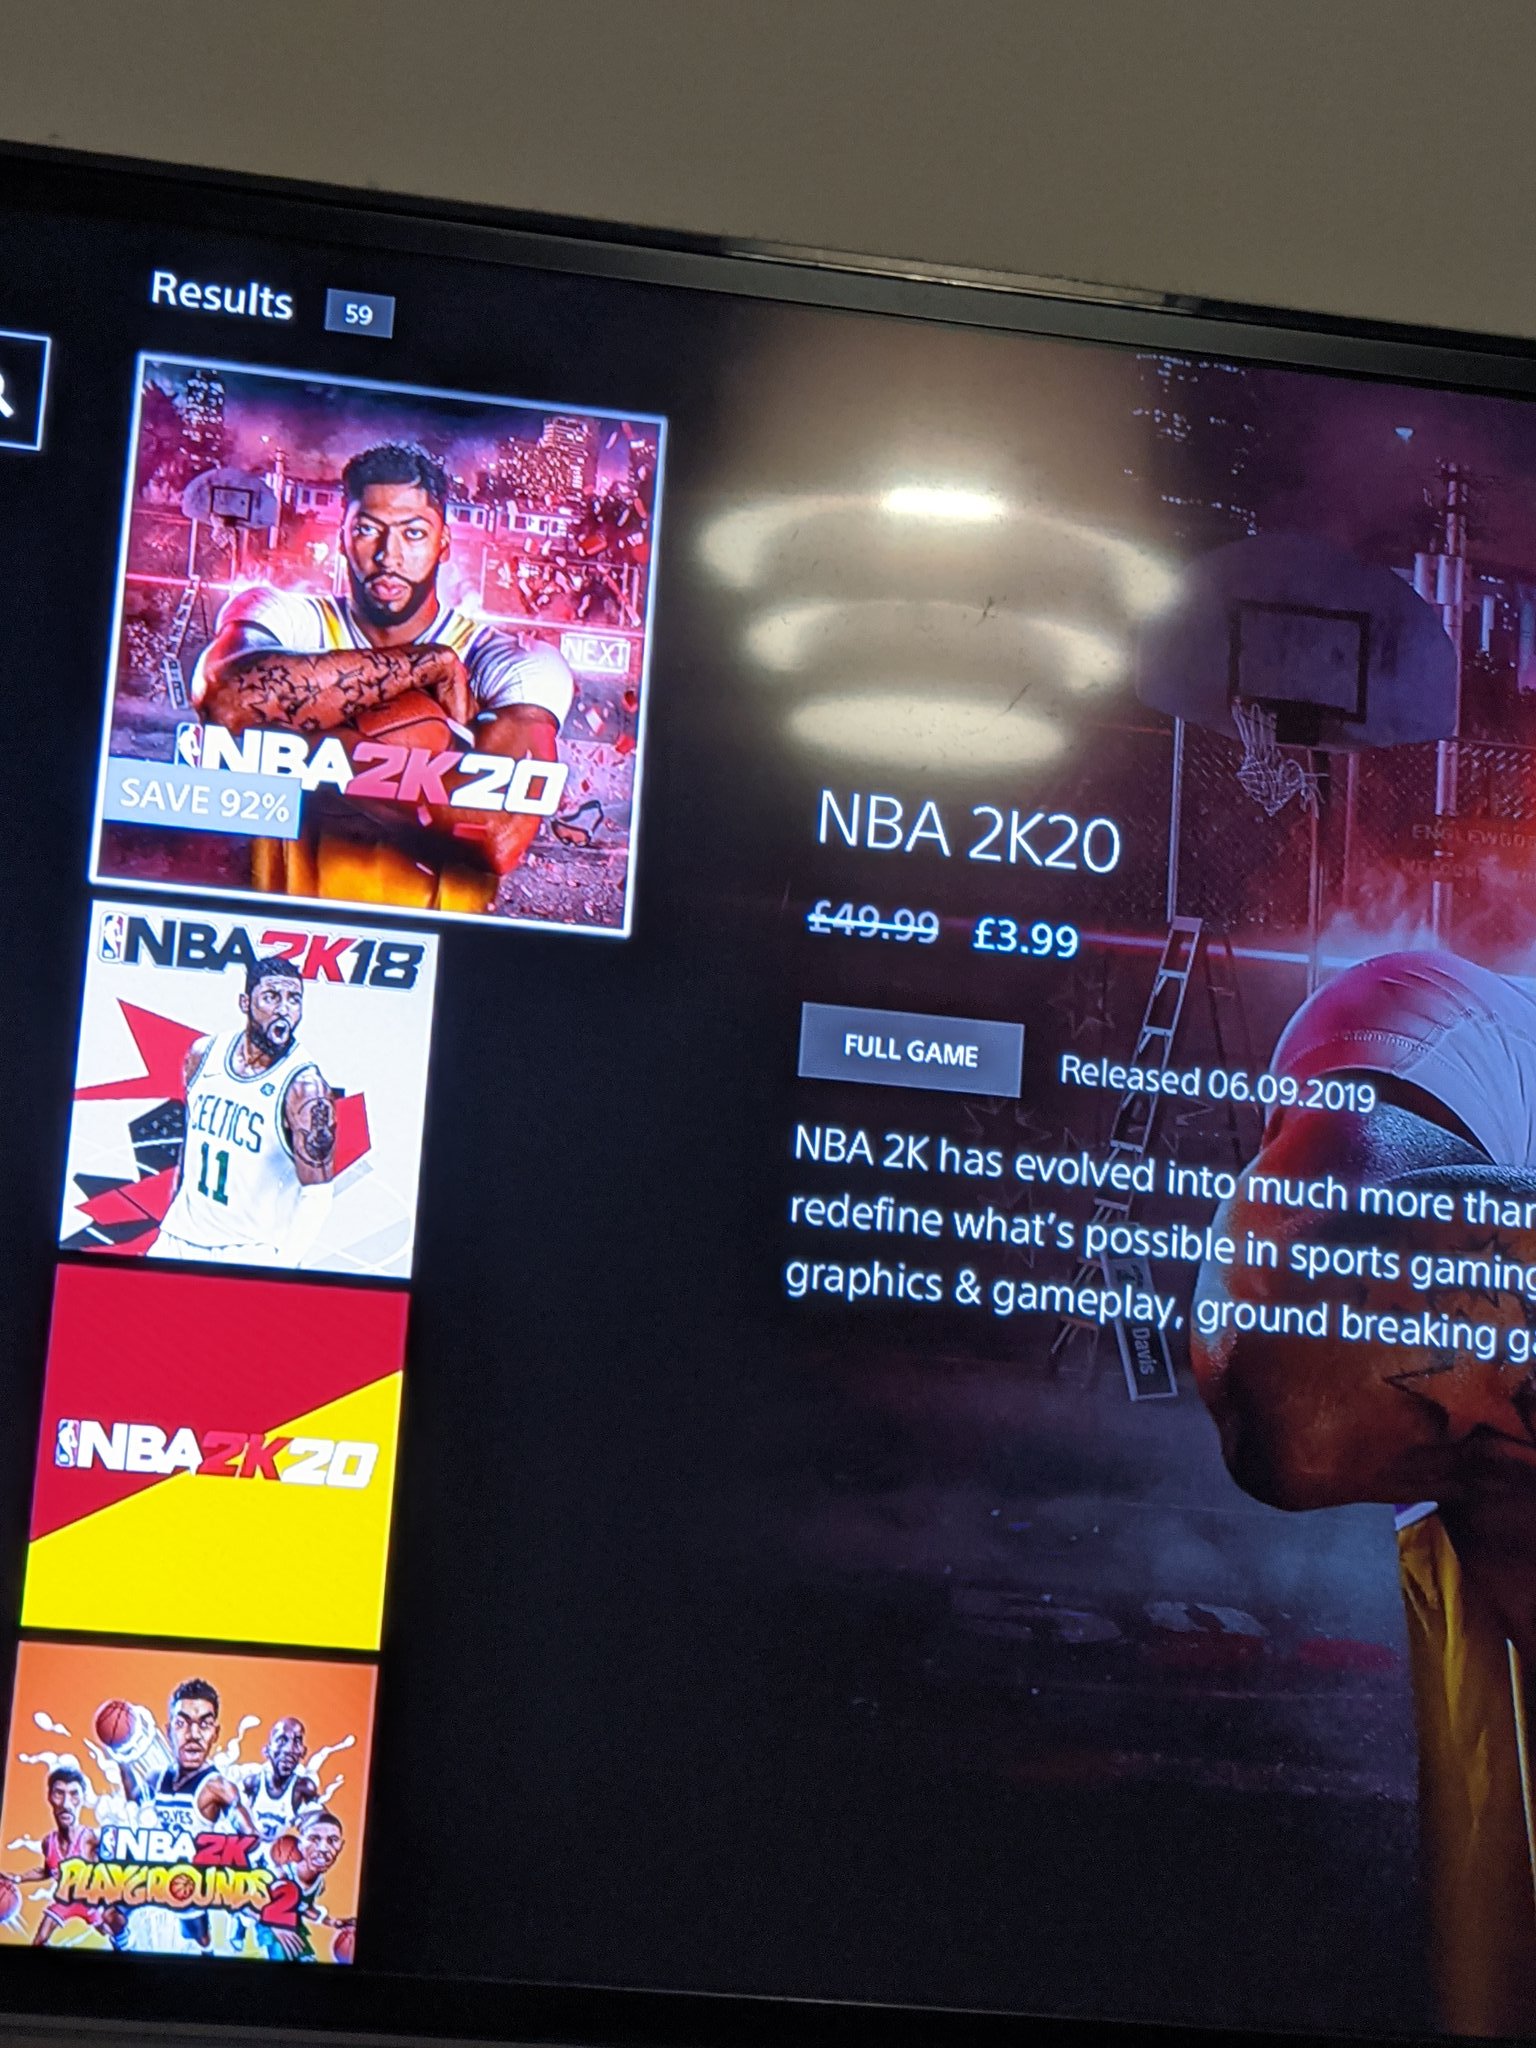 Fantastisk subtropisk aIDS Jamal Edwards MBE, MBA on Twitter: "NBA 2K20 £3.99 in the PlayStation store.  92% discount 😮 Time to pause The Last Dance &amp; have a go at this game.  Ya can't go